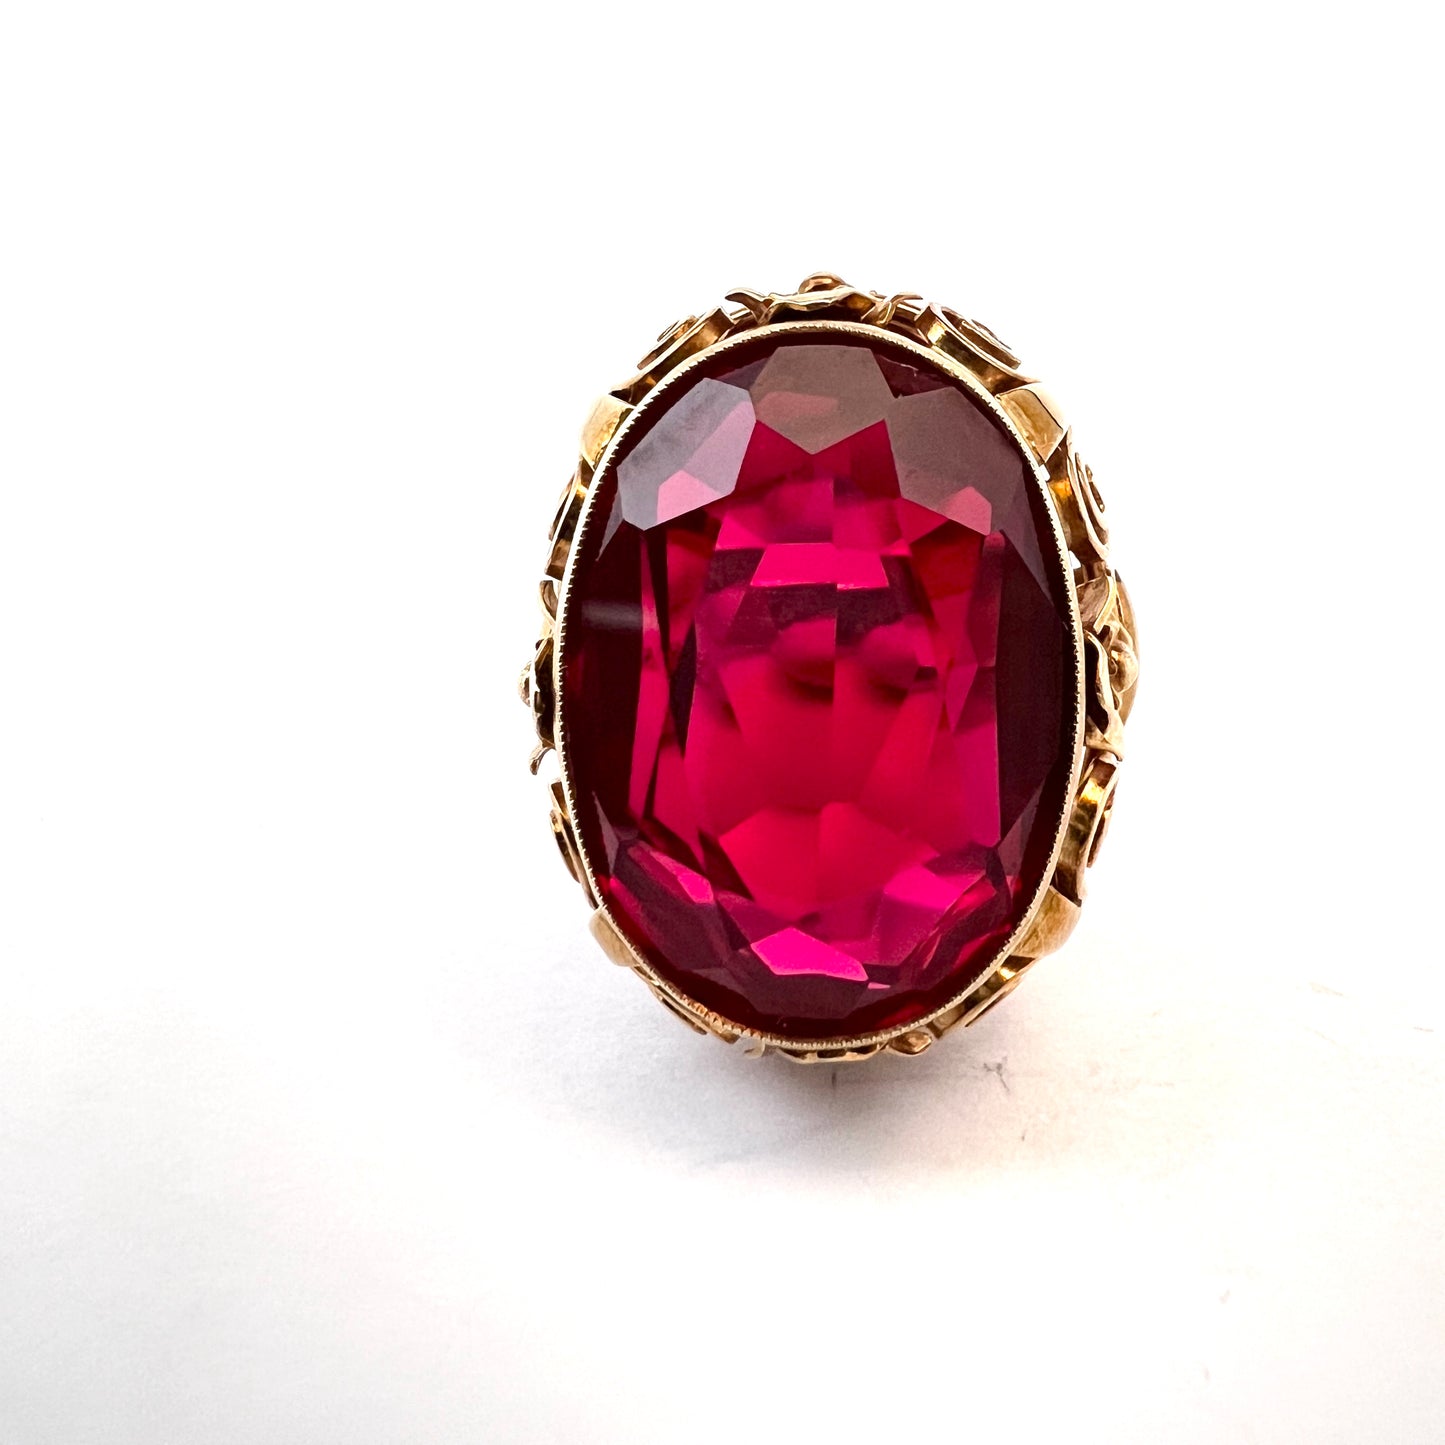 Poland. Vintage c 1960s. Bold 14k Gold Synthetic Ruby Ring. 11.2gram